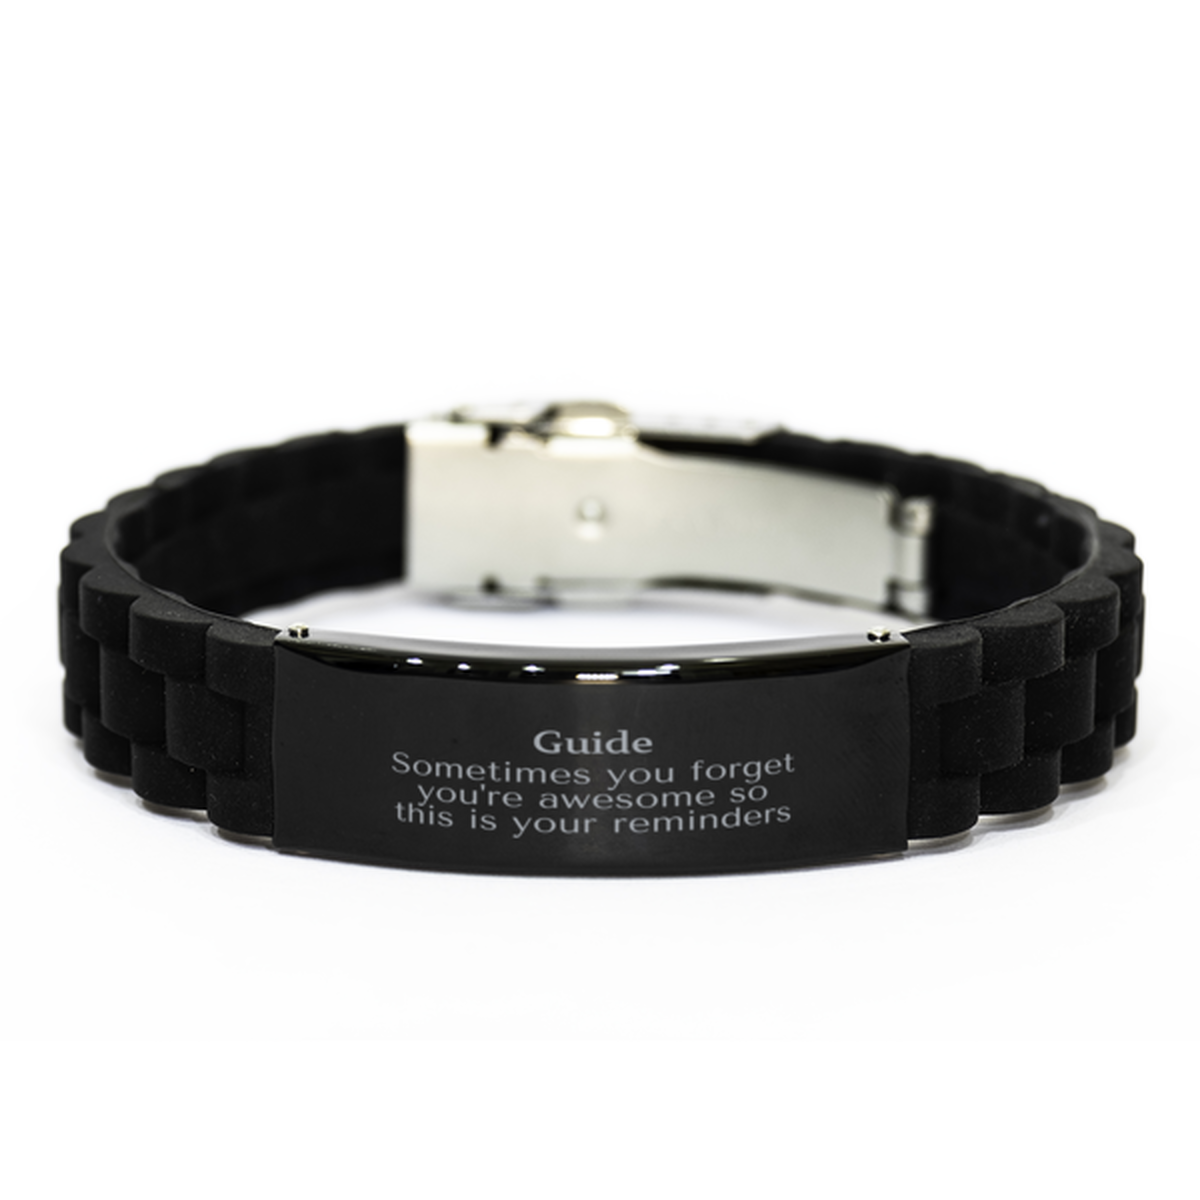 Sentimental Guide Black Glidelock Clasp Bracelet, Guide Sometimes you forget you're awesome so this is your reminders, Graduation Christmas Birthday Gifts for Guide, Men, Women, Coworkers